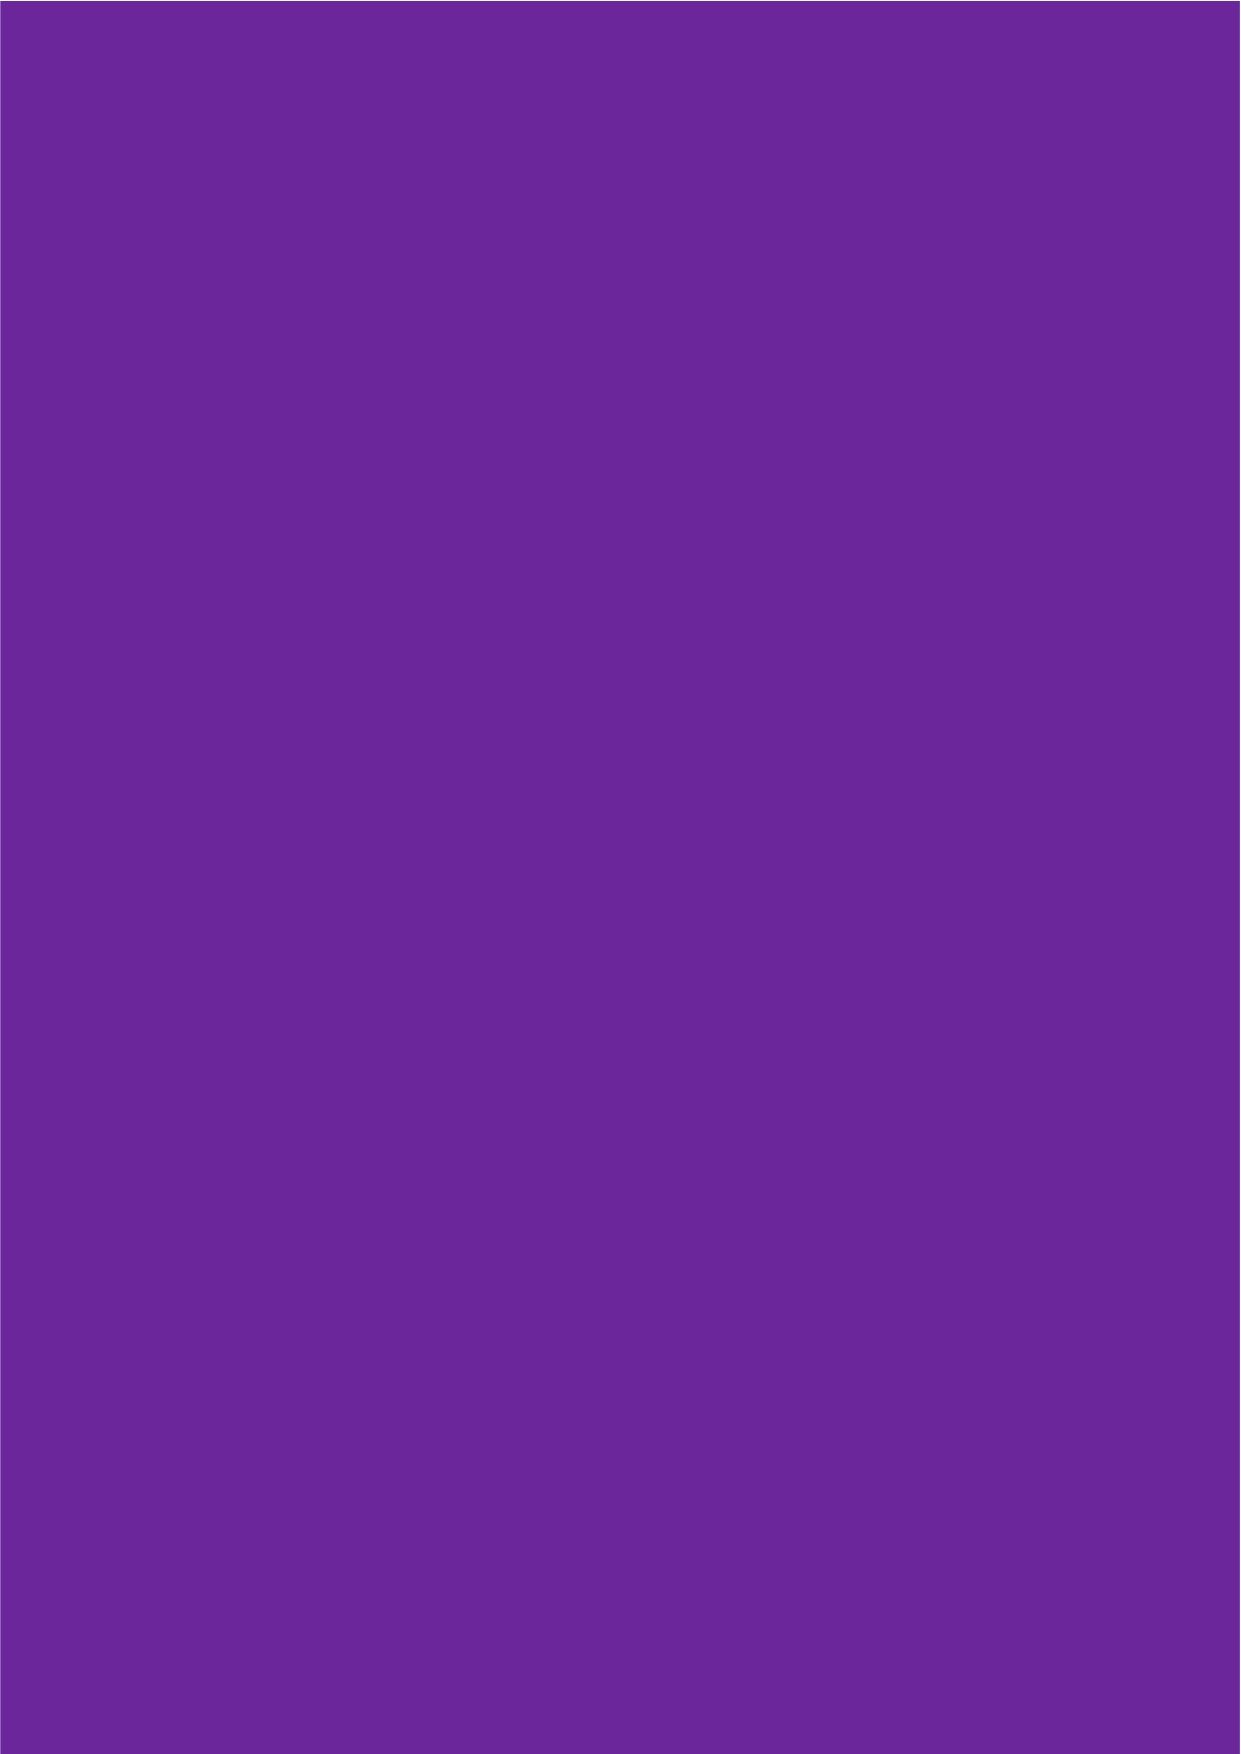 Purple wall blank canvas i can write whatever I want on you